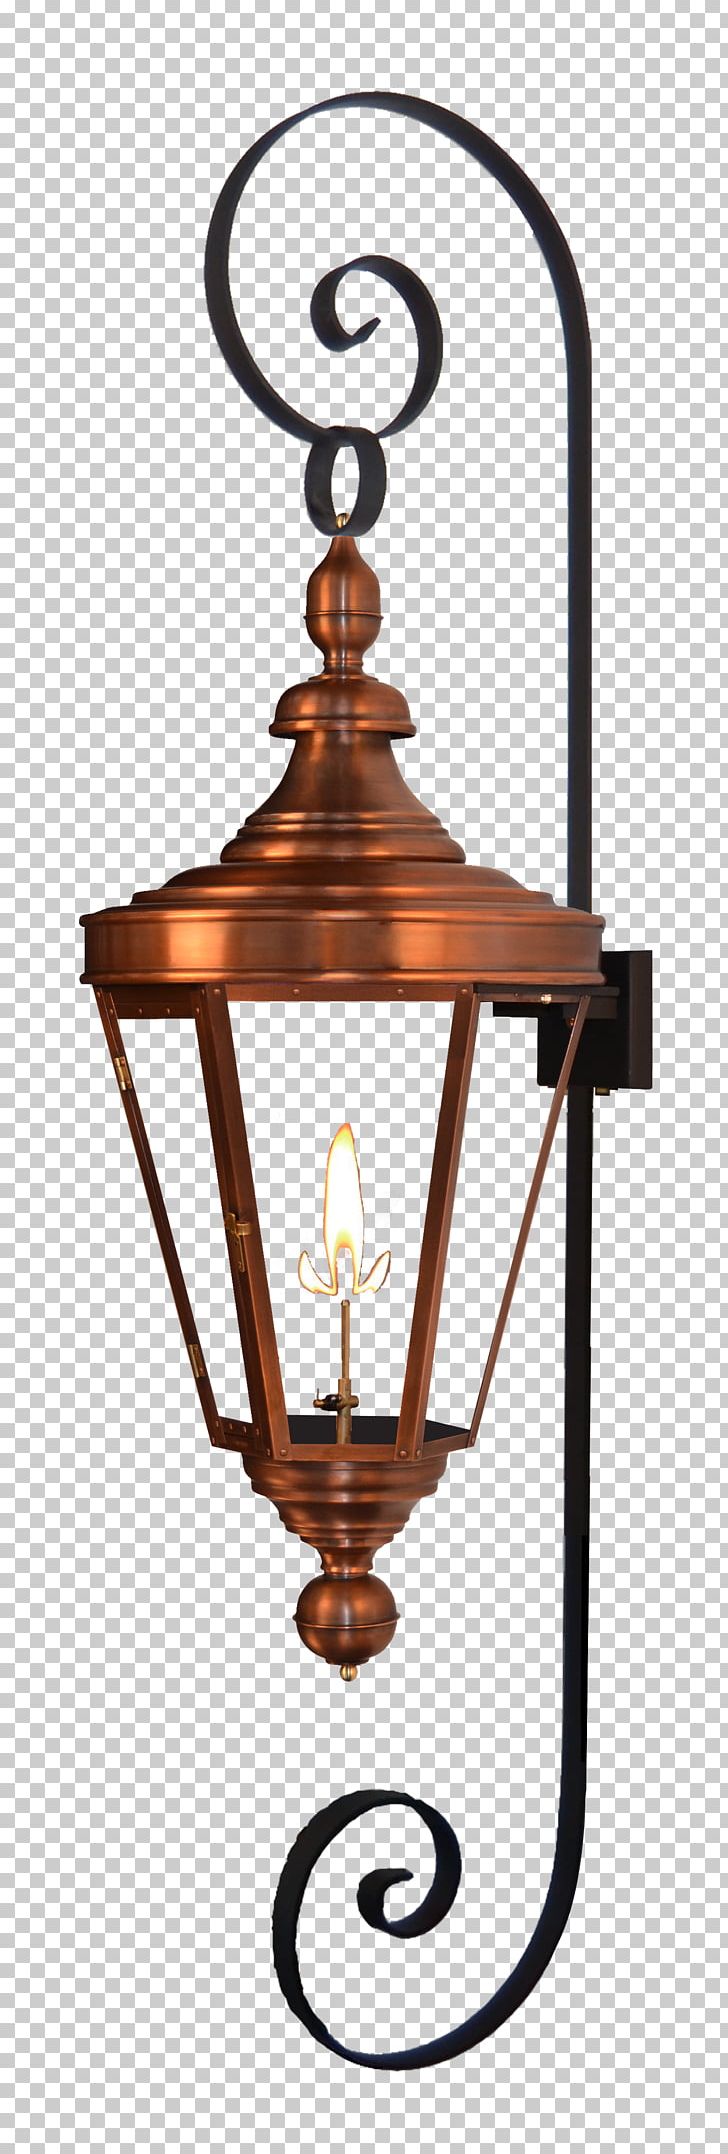 Lantern Gas Lighting Landscape Lighting Light Fixture PNG, Clipart, Candle Holder, Ceiling Fixture, Coppersmith, Electrical Filament, Electricity Free PNG Download